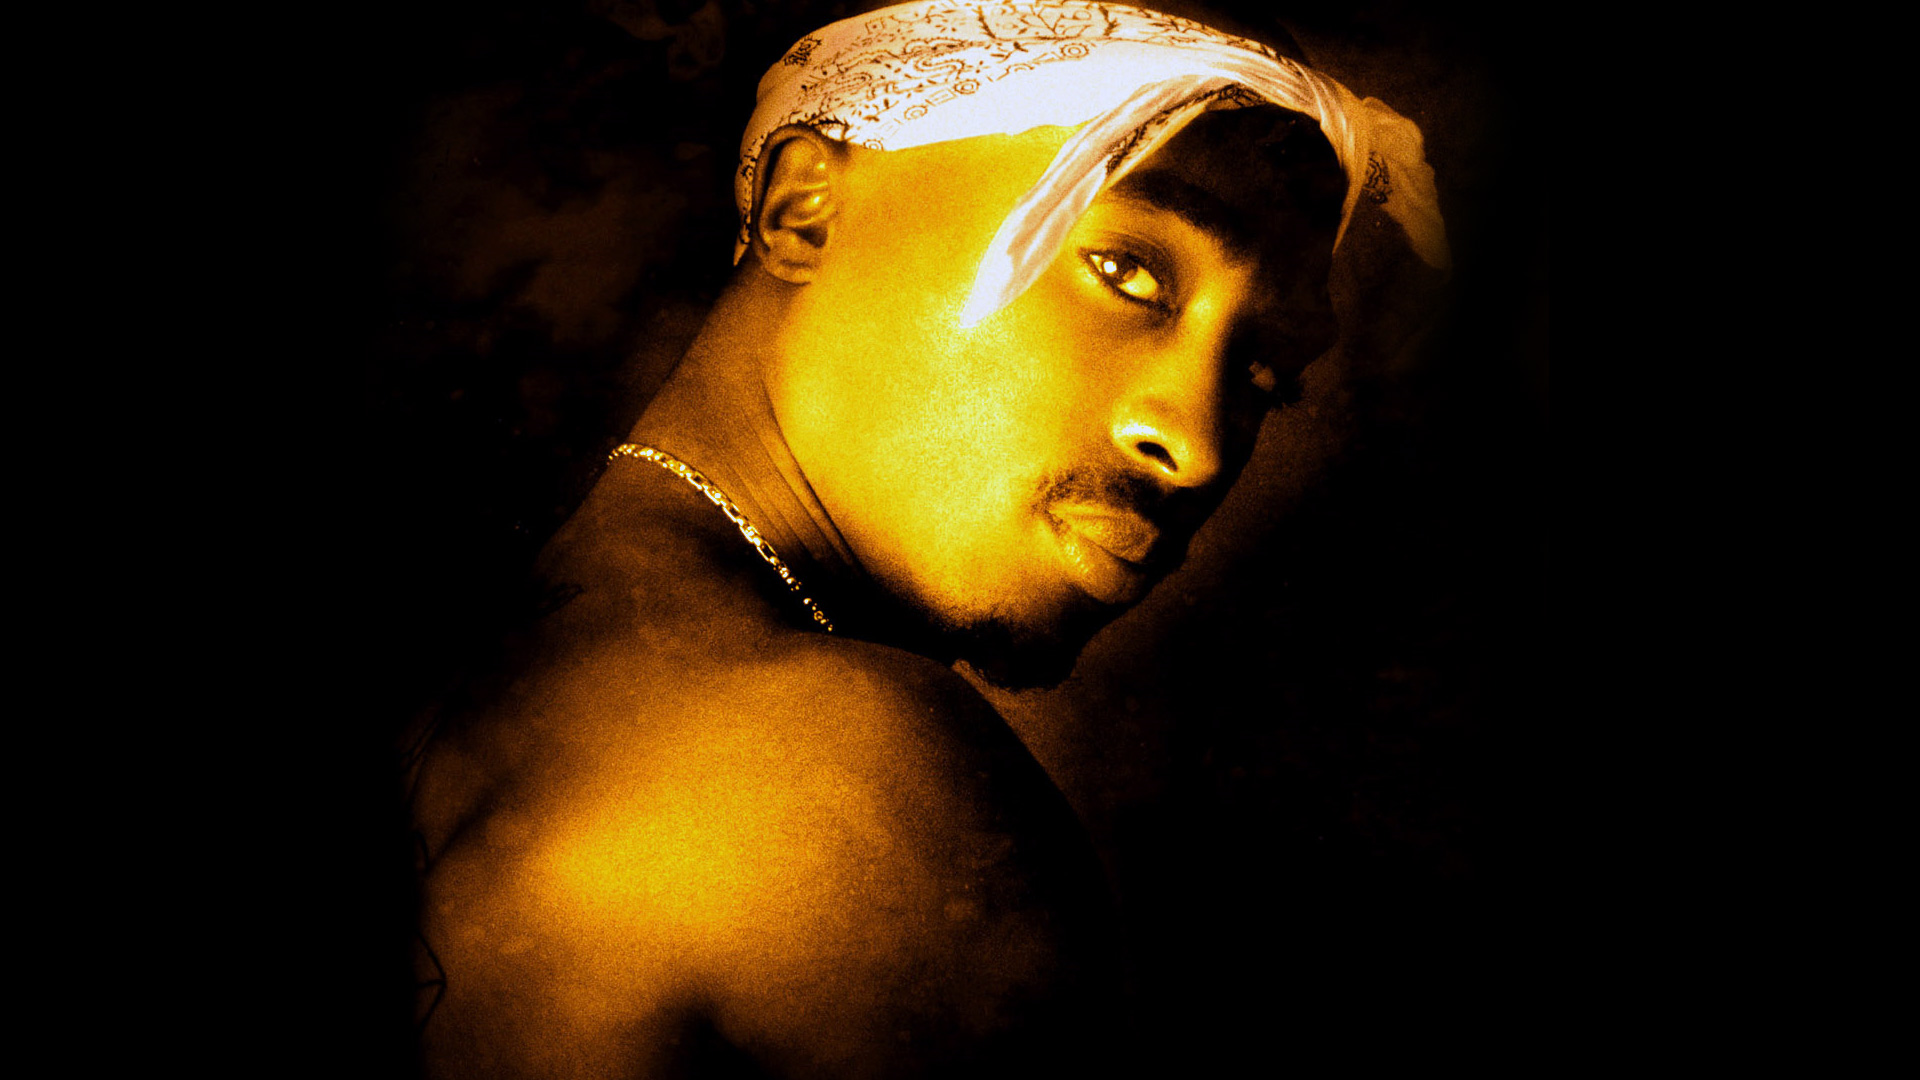  2pac wallpaper  android HD Photos  Wallpapers 0 Images  Page 1